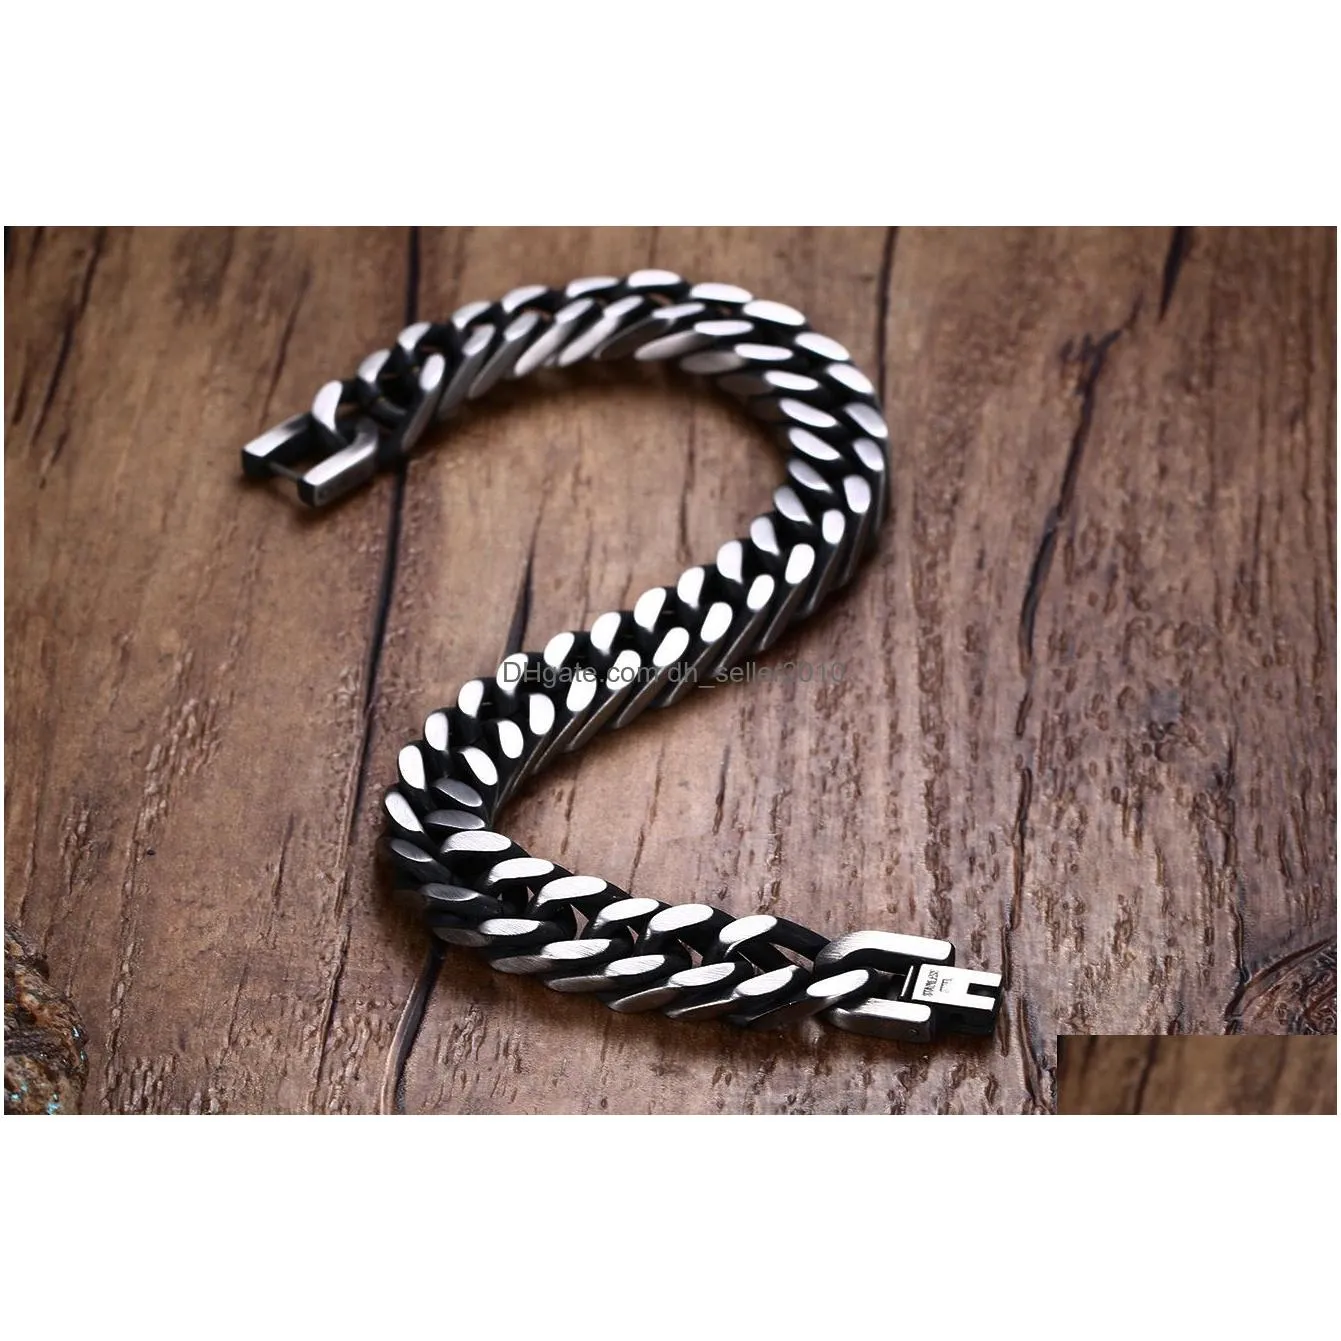 fashion design jewelry european punk rock steam link chain mens bracelets chunky accessories stainless steel jewelry for boys gift